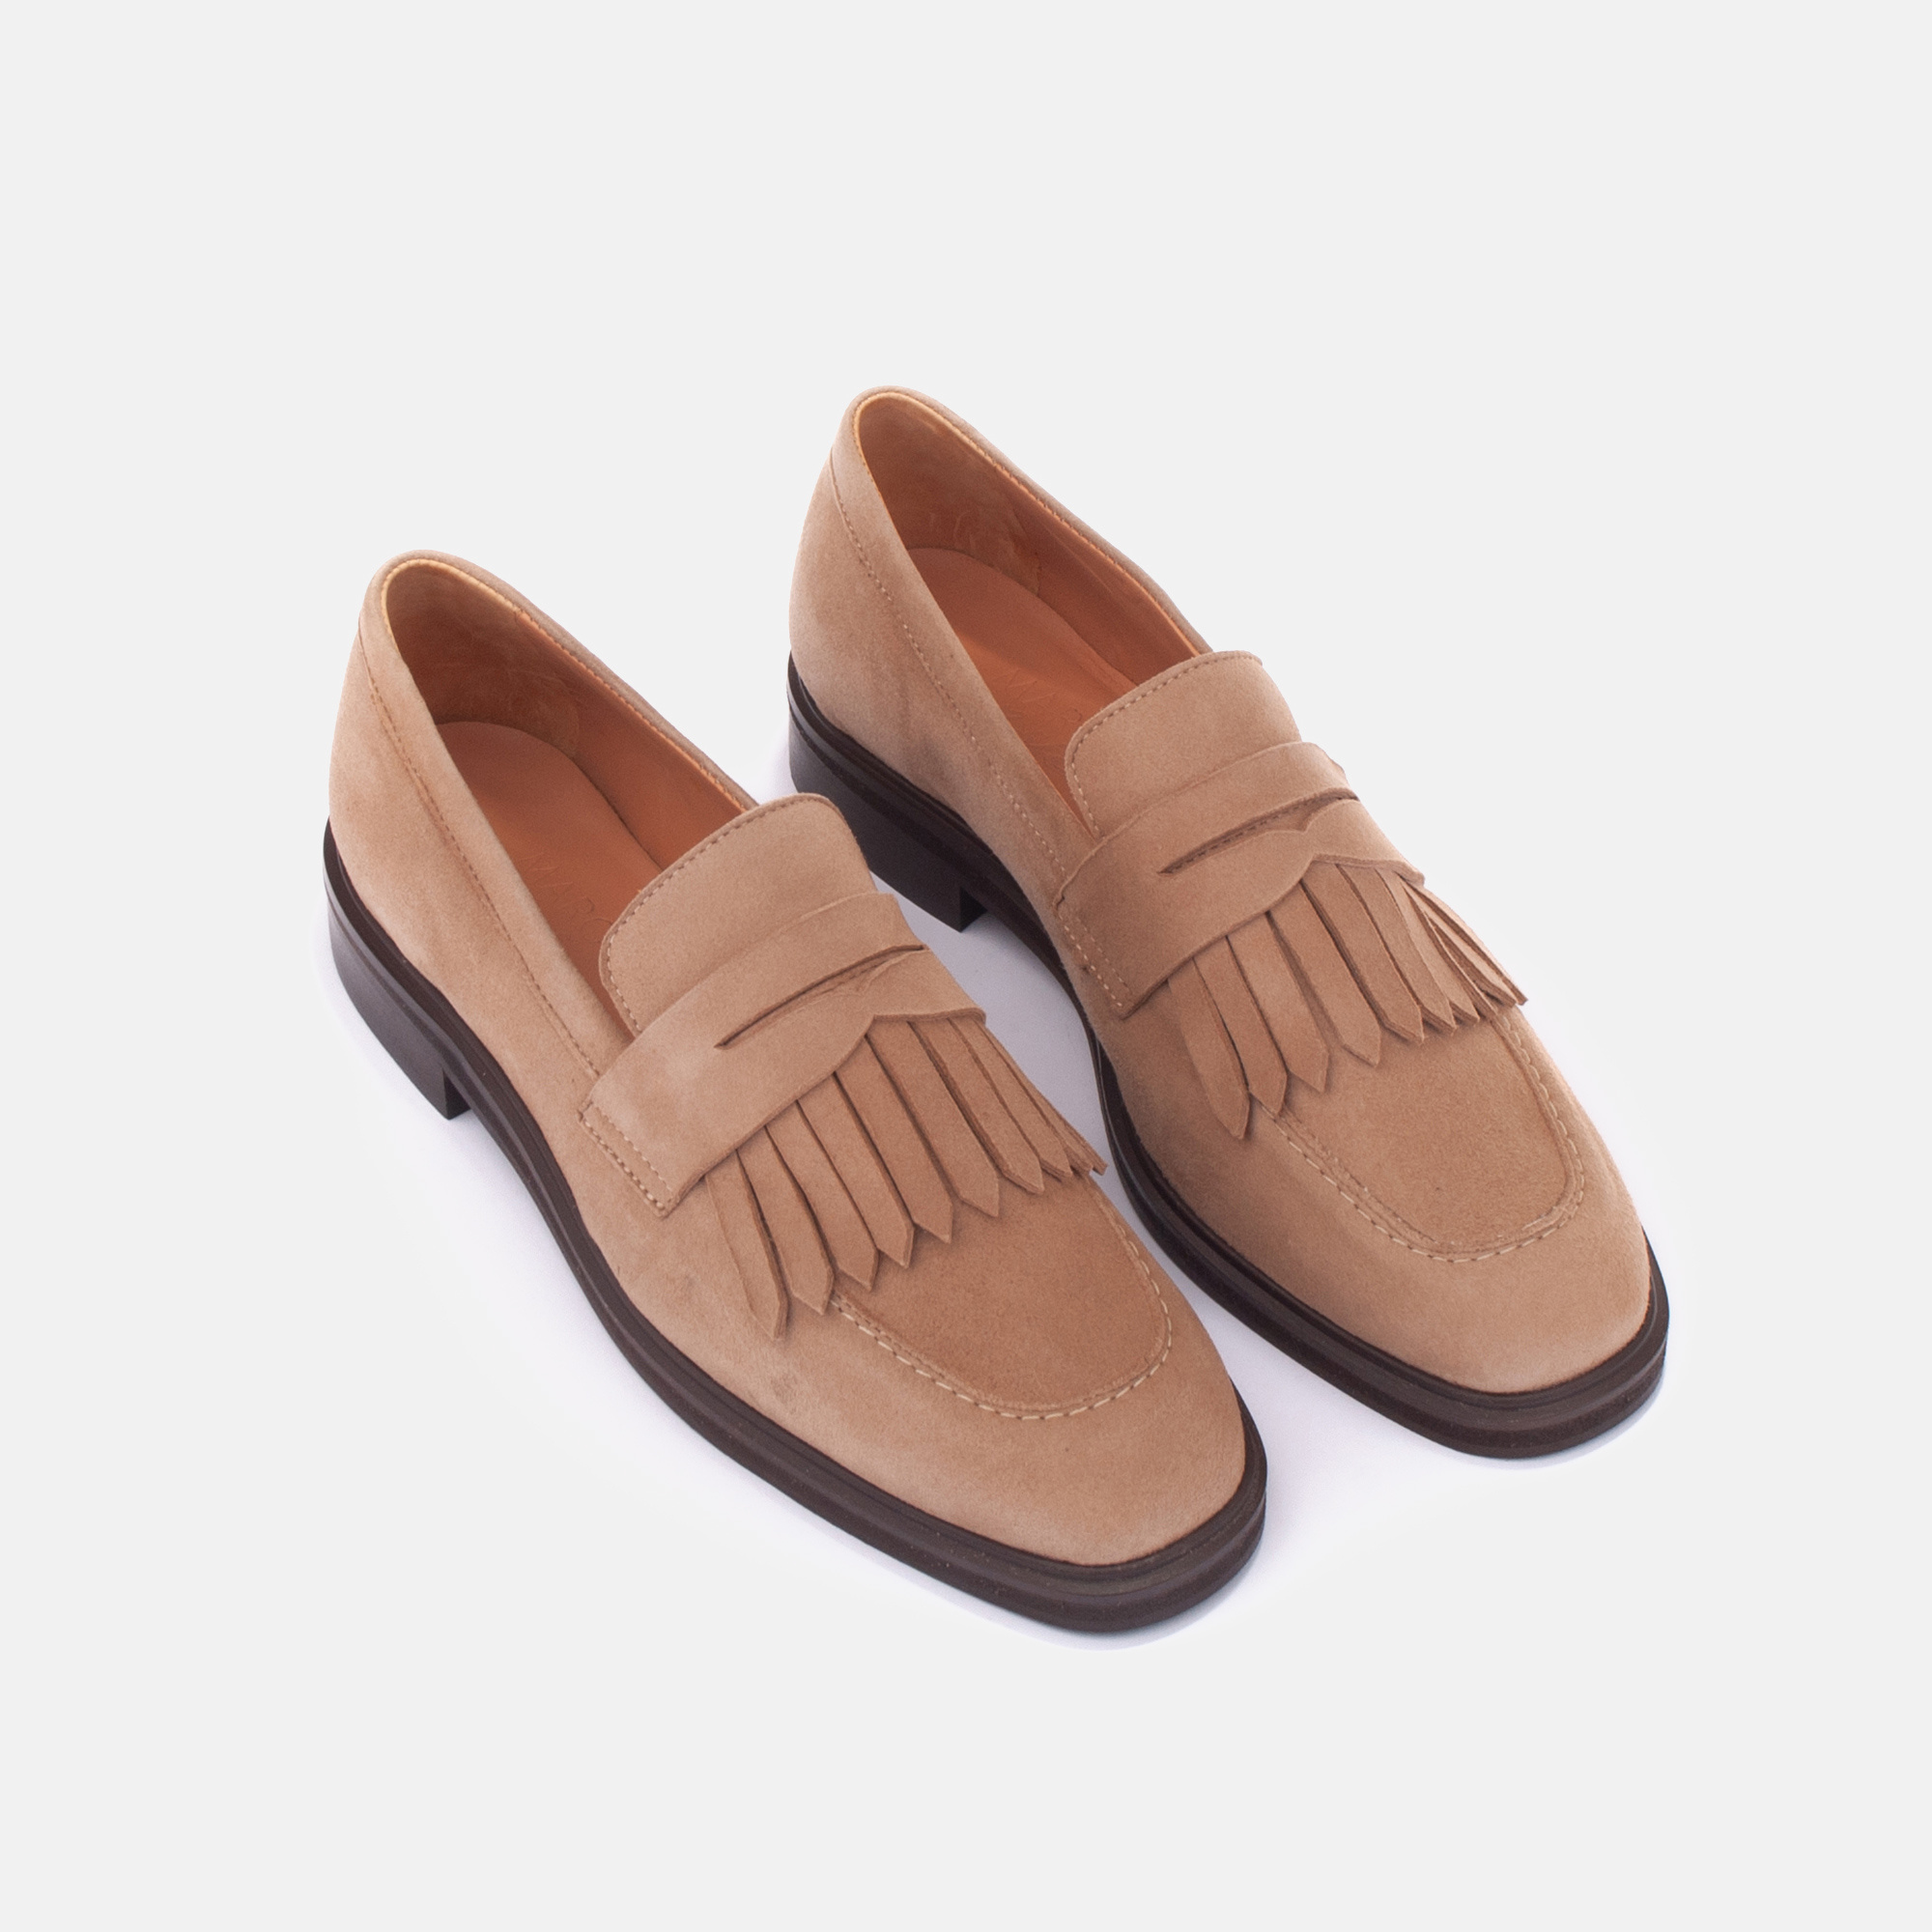 Fringed loafers